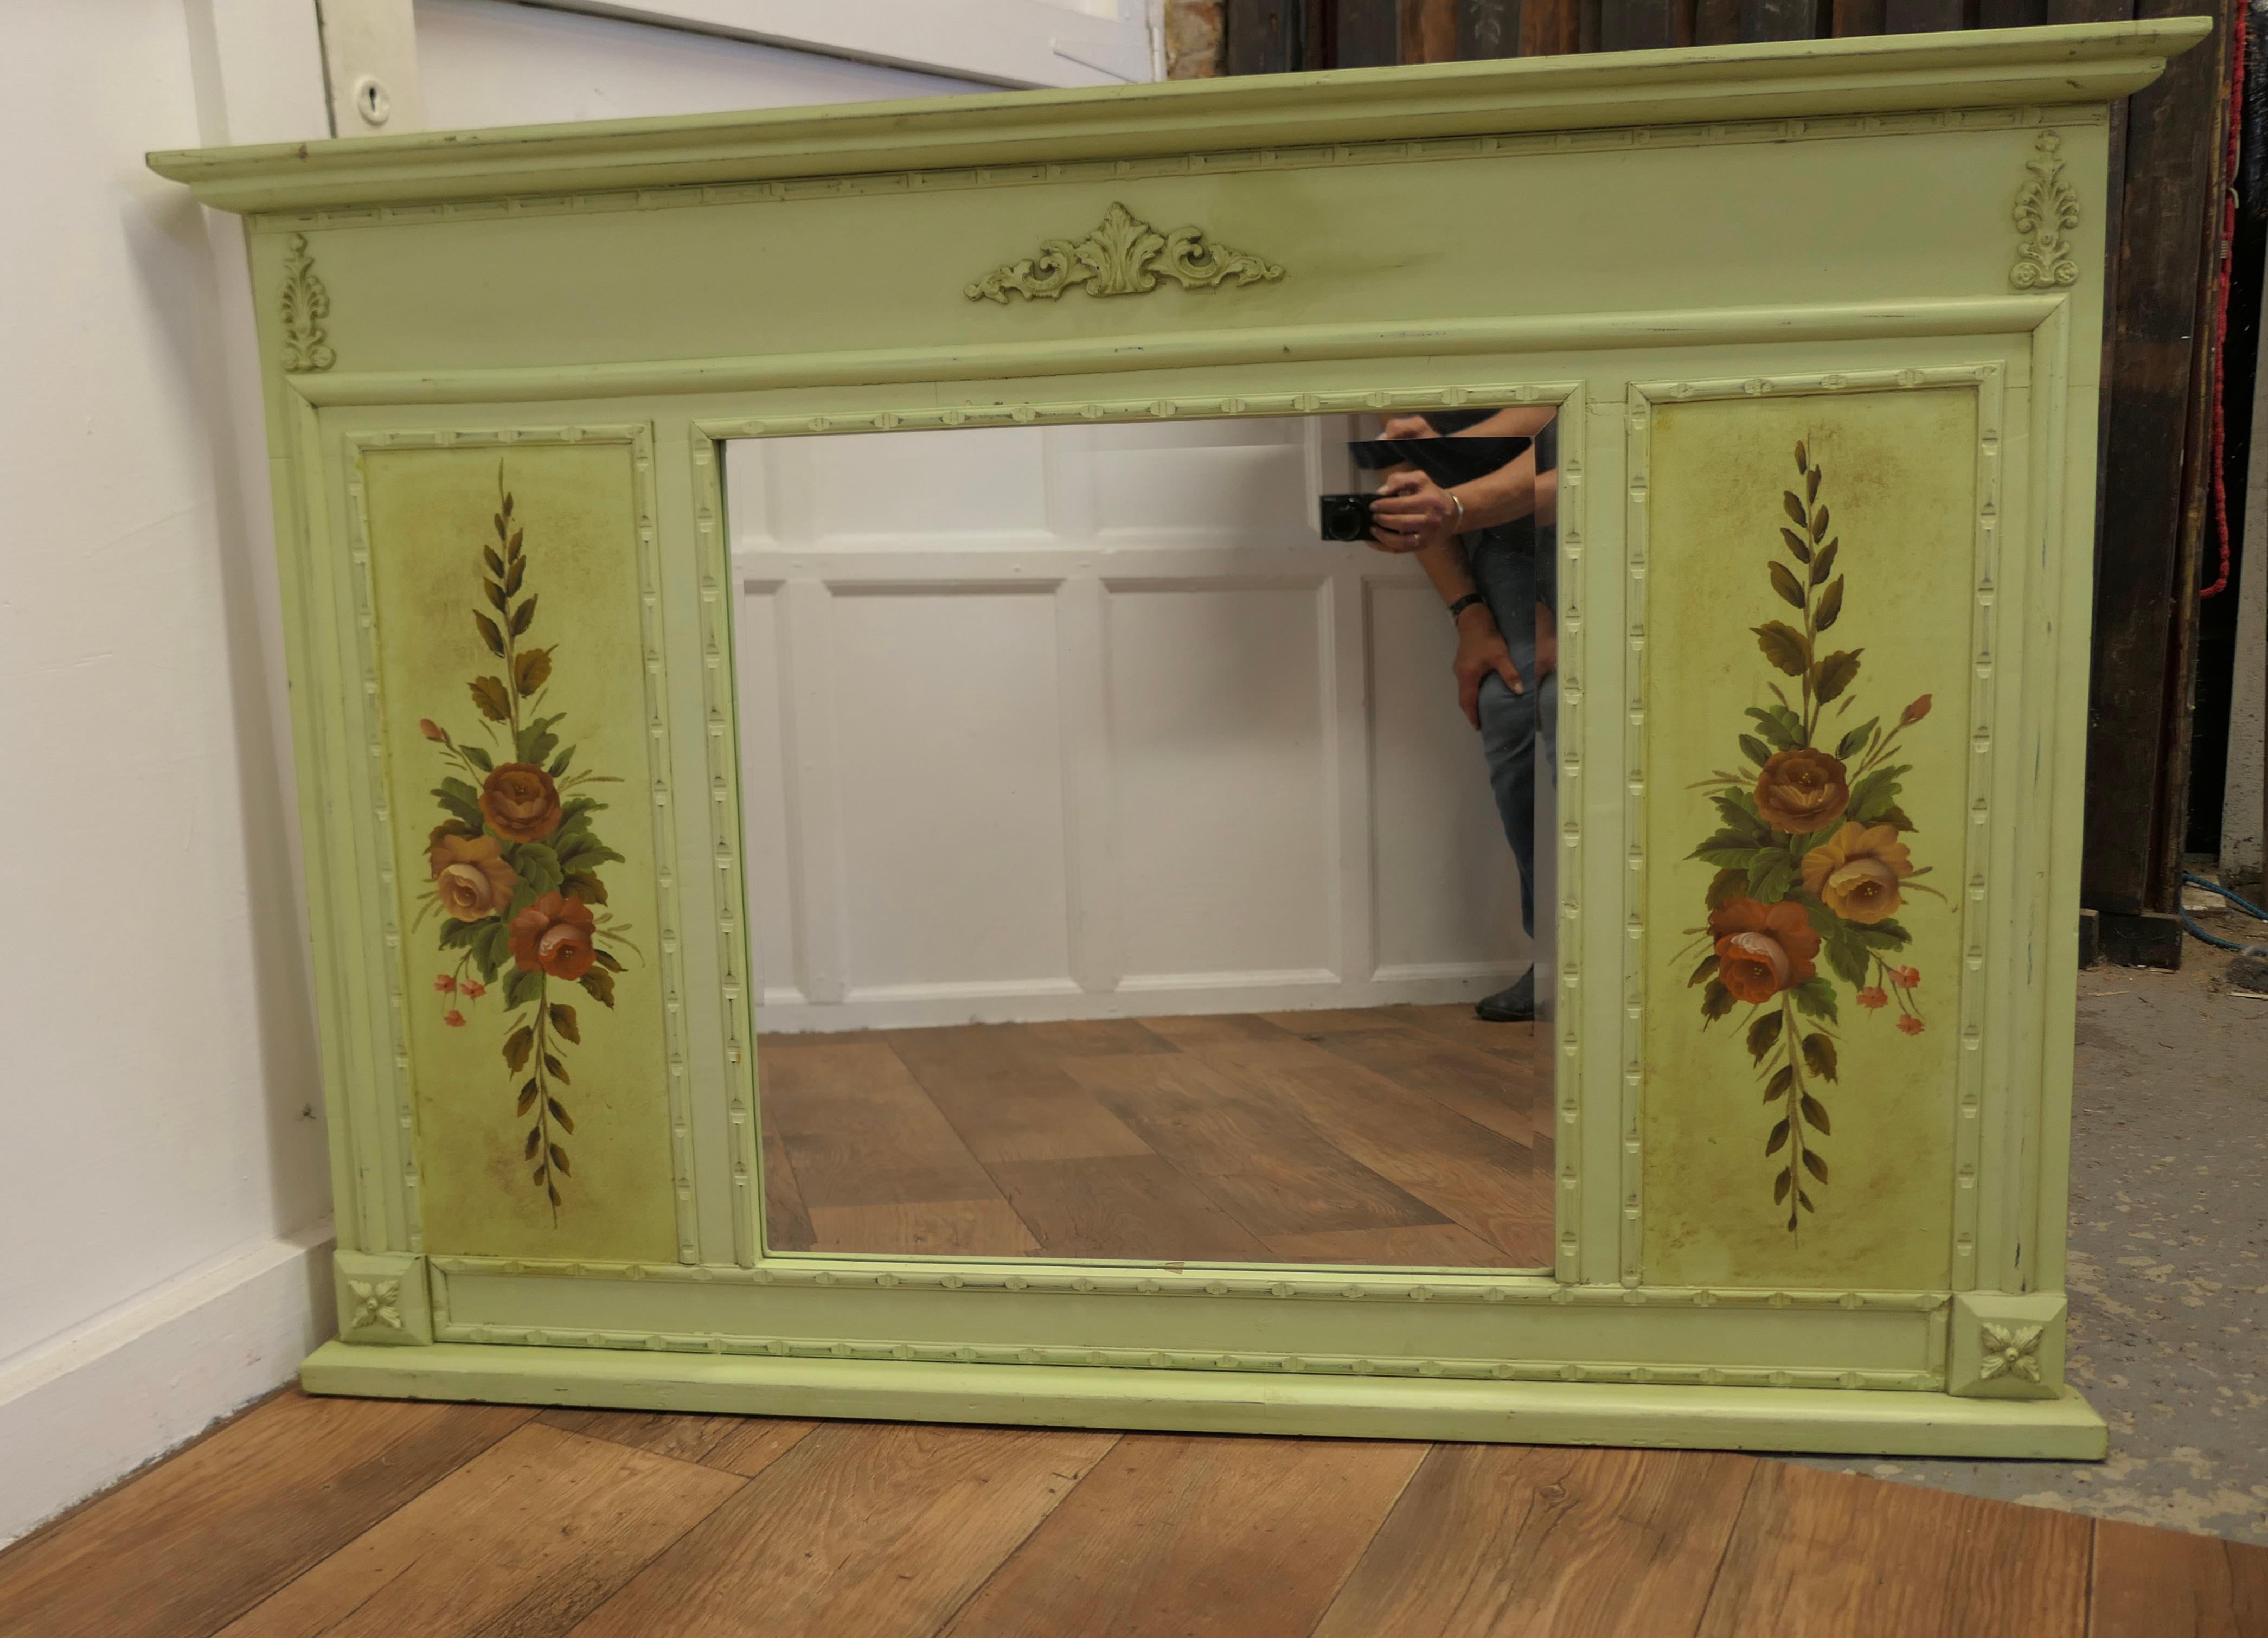 Large Folk Art Painted Overmantel or Wall Mirror

This is a Large piece with a bevelled mirror at the centre, the Frame has painted floral decoration at each side
The Overmantel is in good Sound good sound condition
The Mirror Frame is 35” high